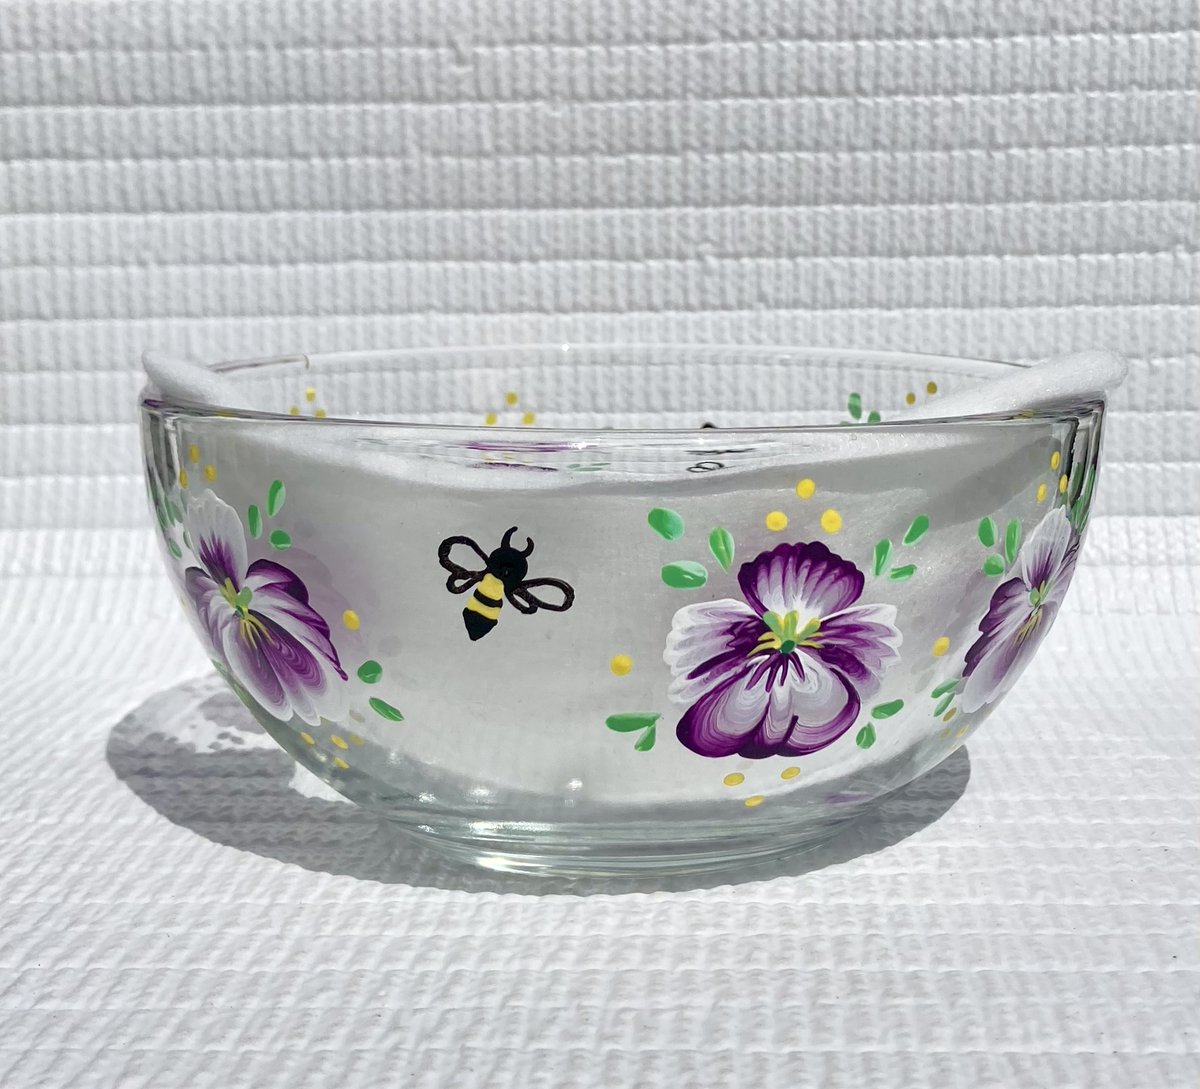 Check out this colorful candy dish etsy.com/listing/171011… #candydish #pansies #floralbowl #SMILEtt23 #CraftBizParty #etsystore #MothersDay